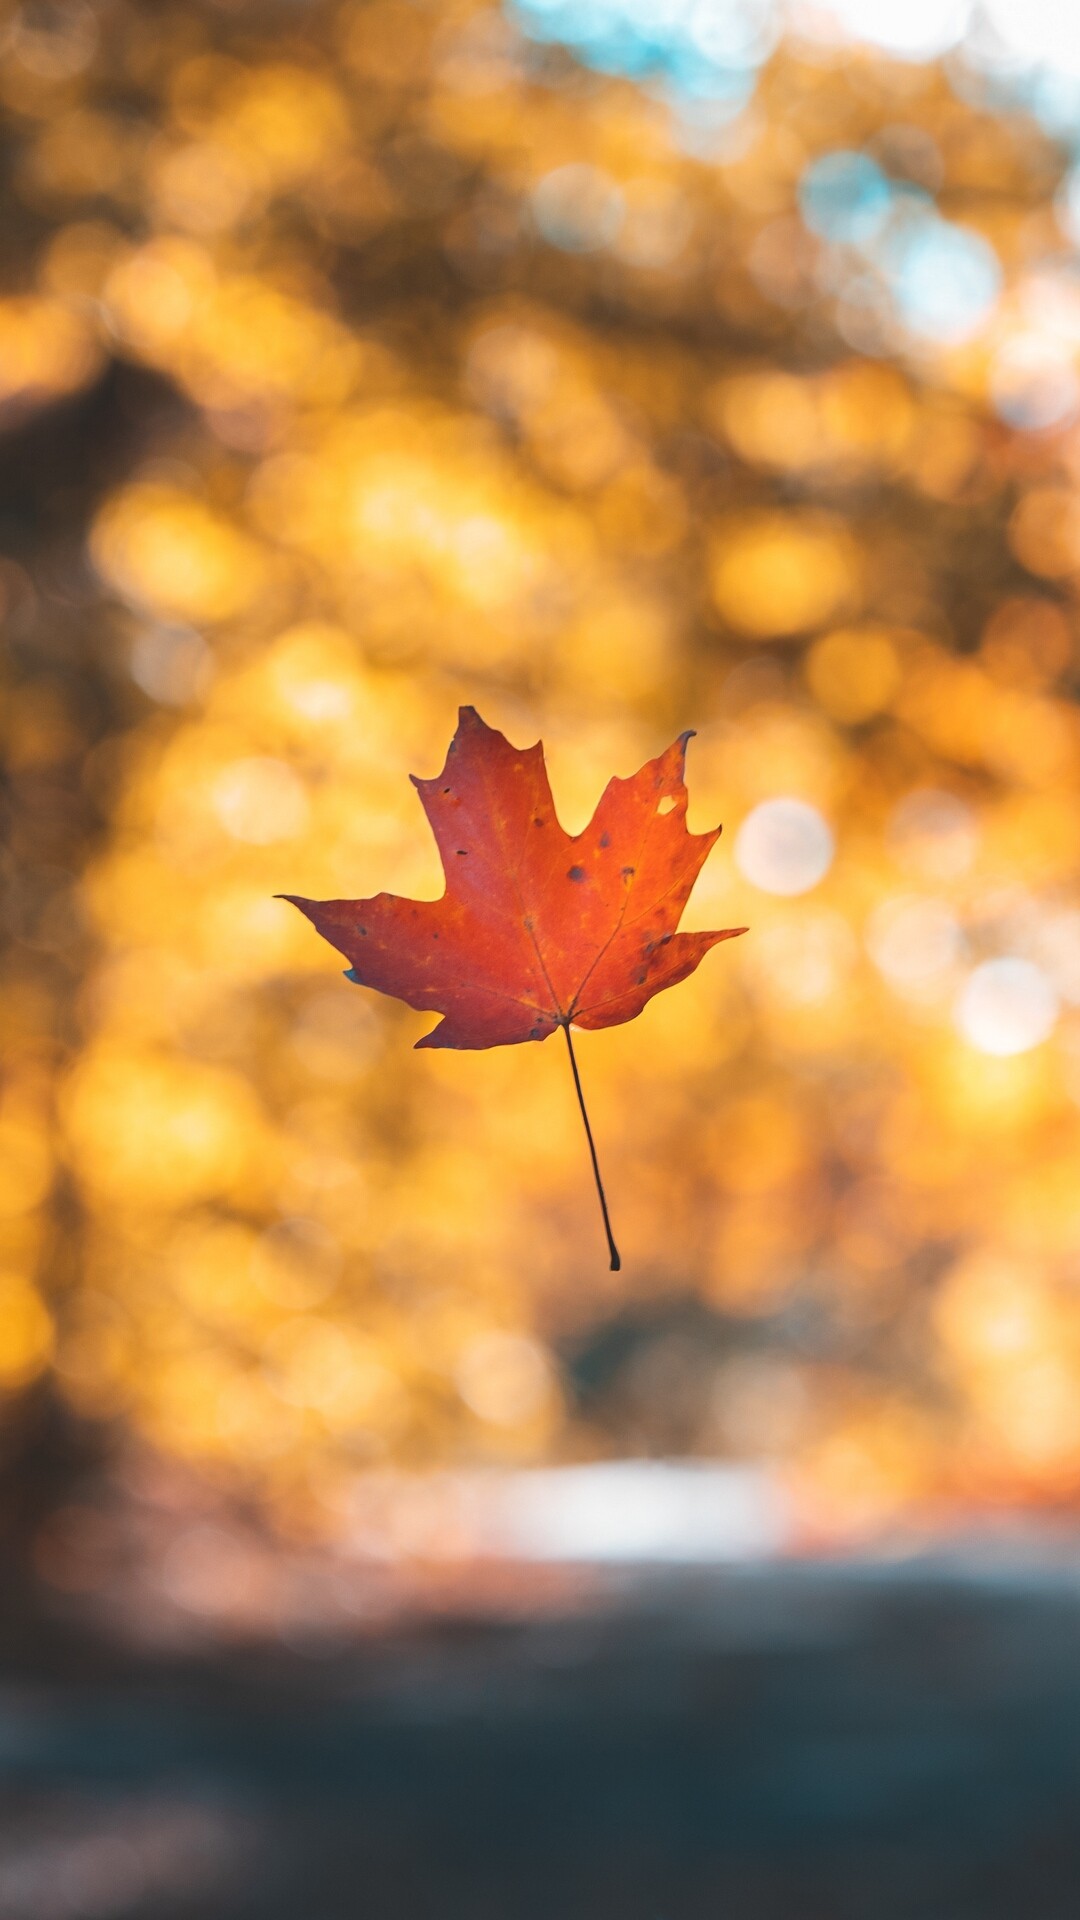 Autumn: The season after summer, Brightly colored maple leaf. 1080x1920 Full HD Background.